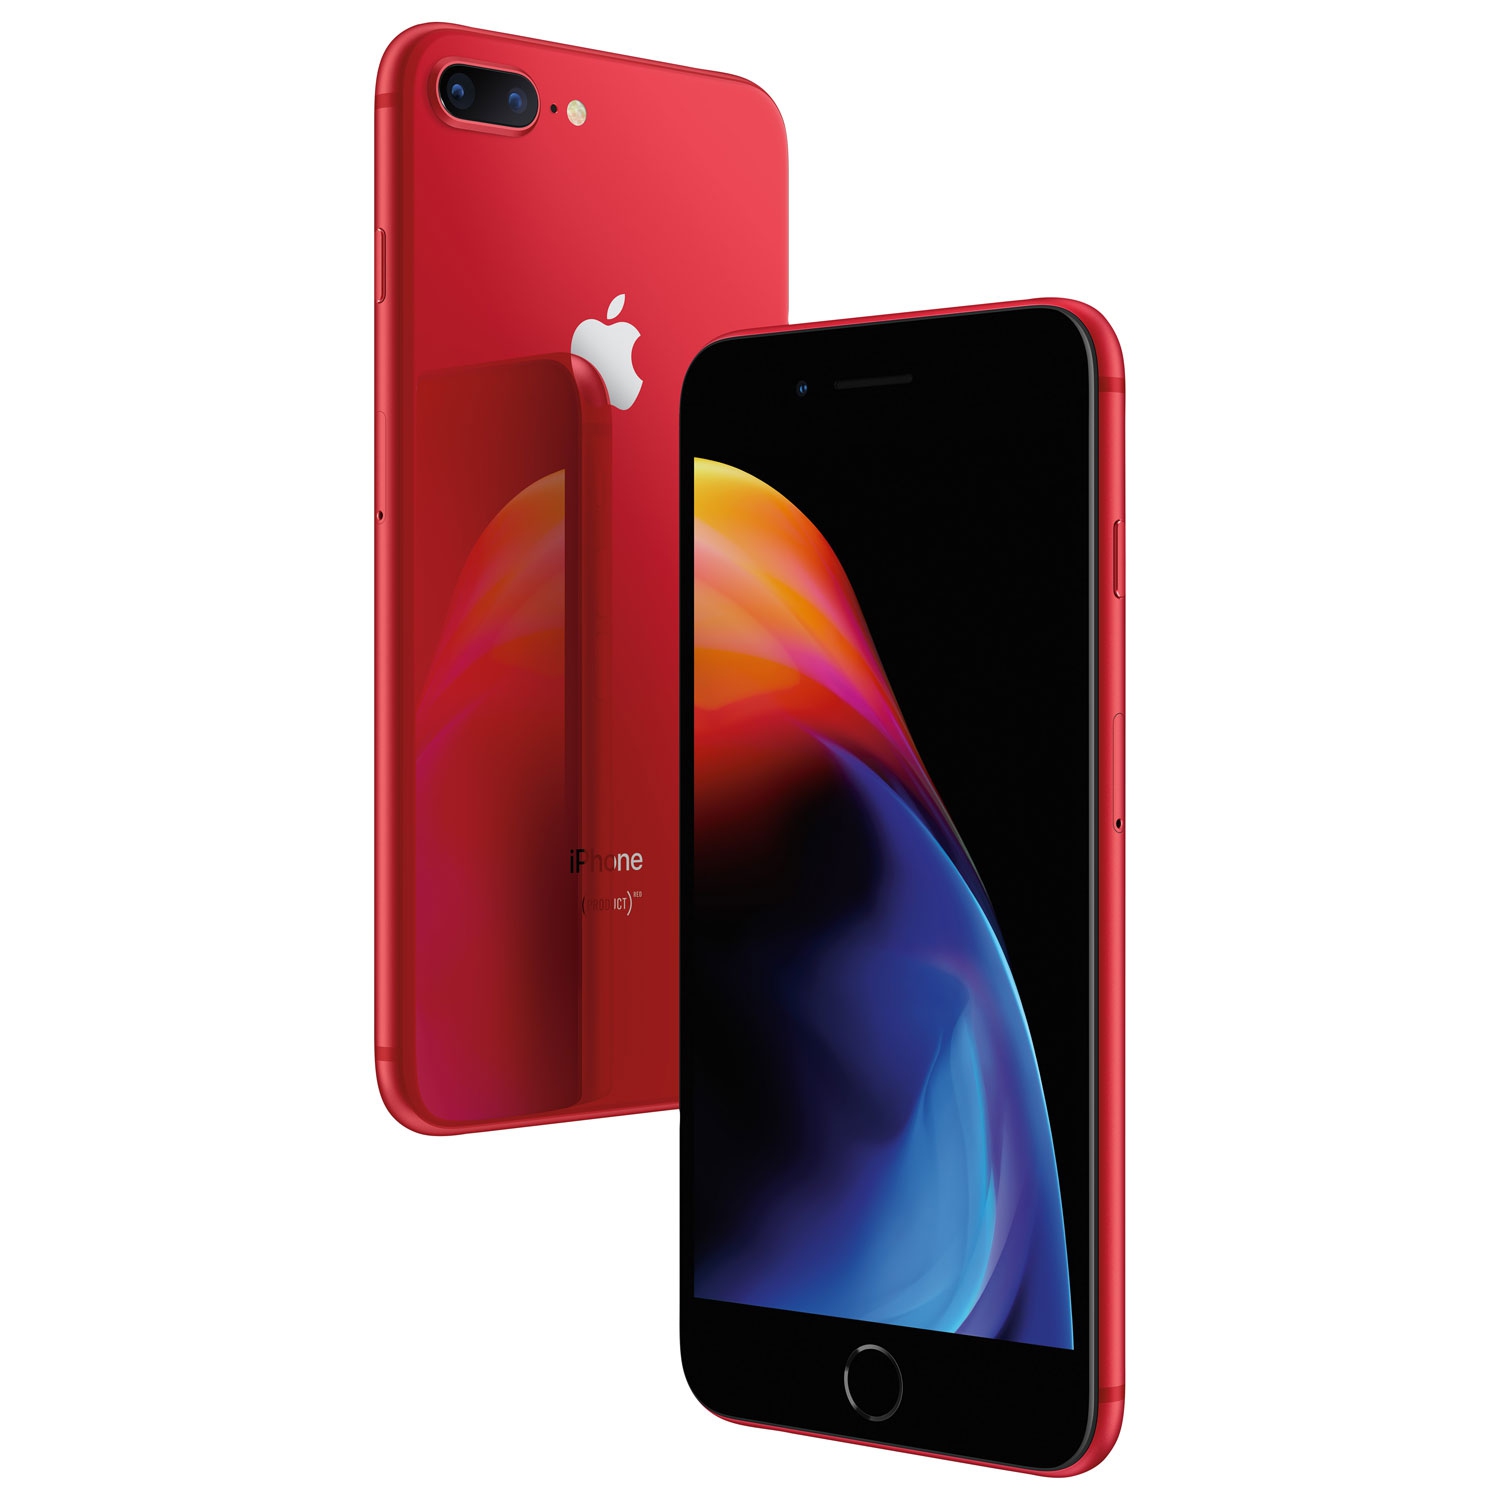 Apple iPhone 8 Plus 256GB Smartphone - (Product)RED - Unlocked - Open Box